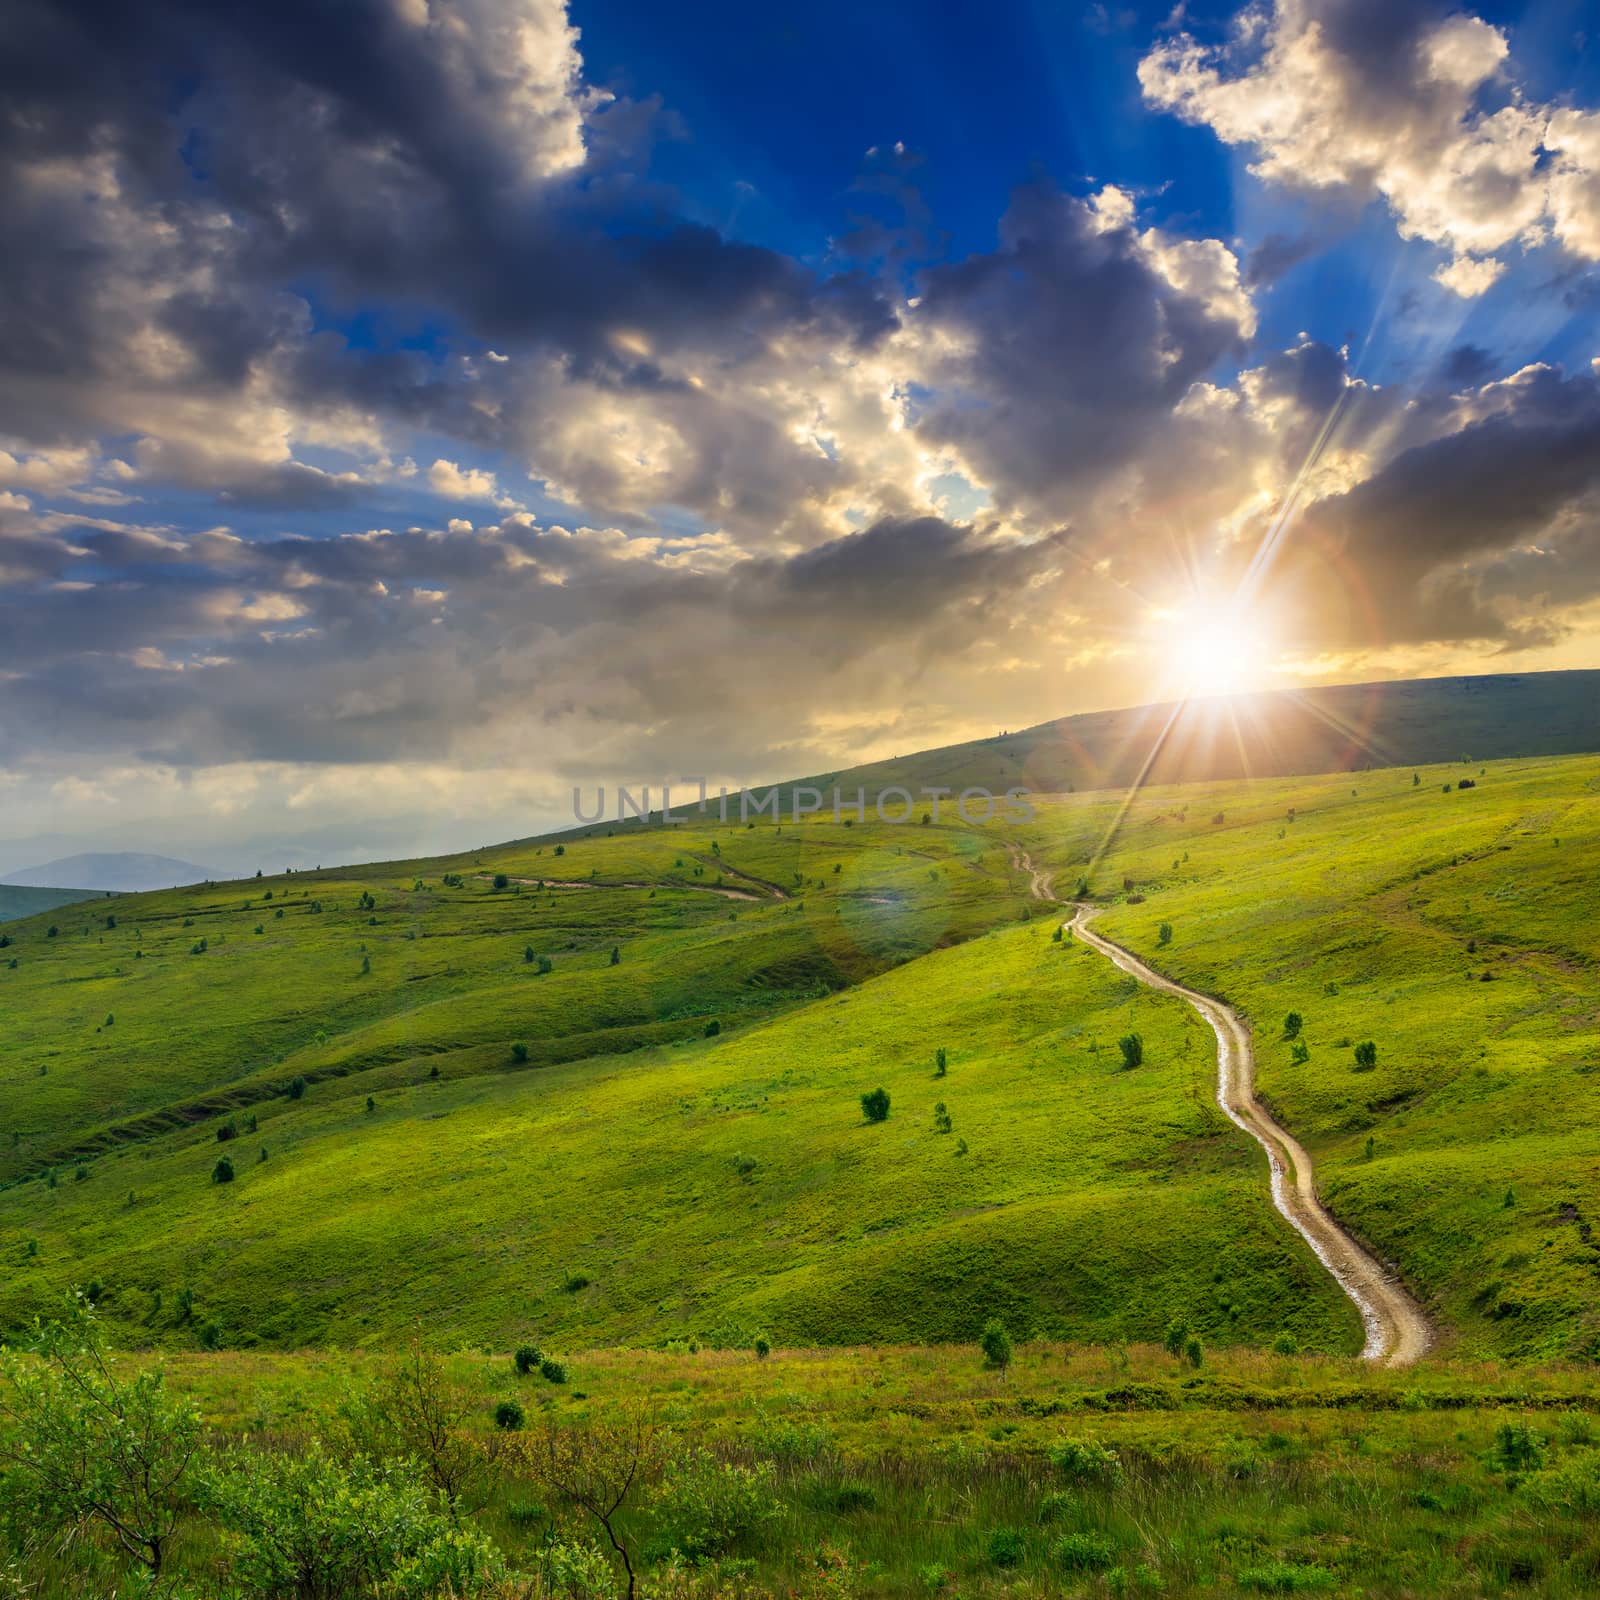 winding road through a large meadow on the hillside with some trees at sunset